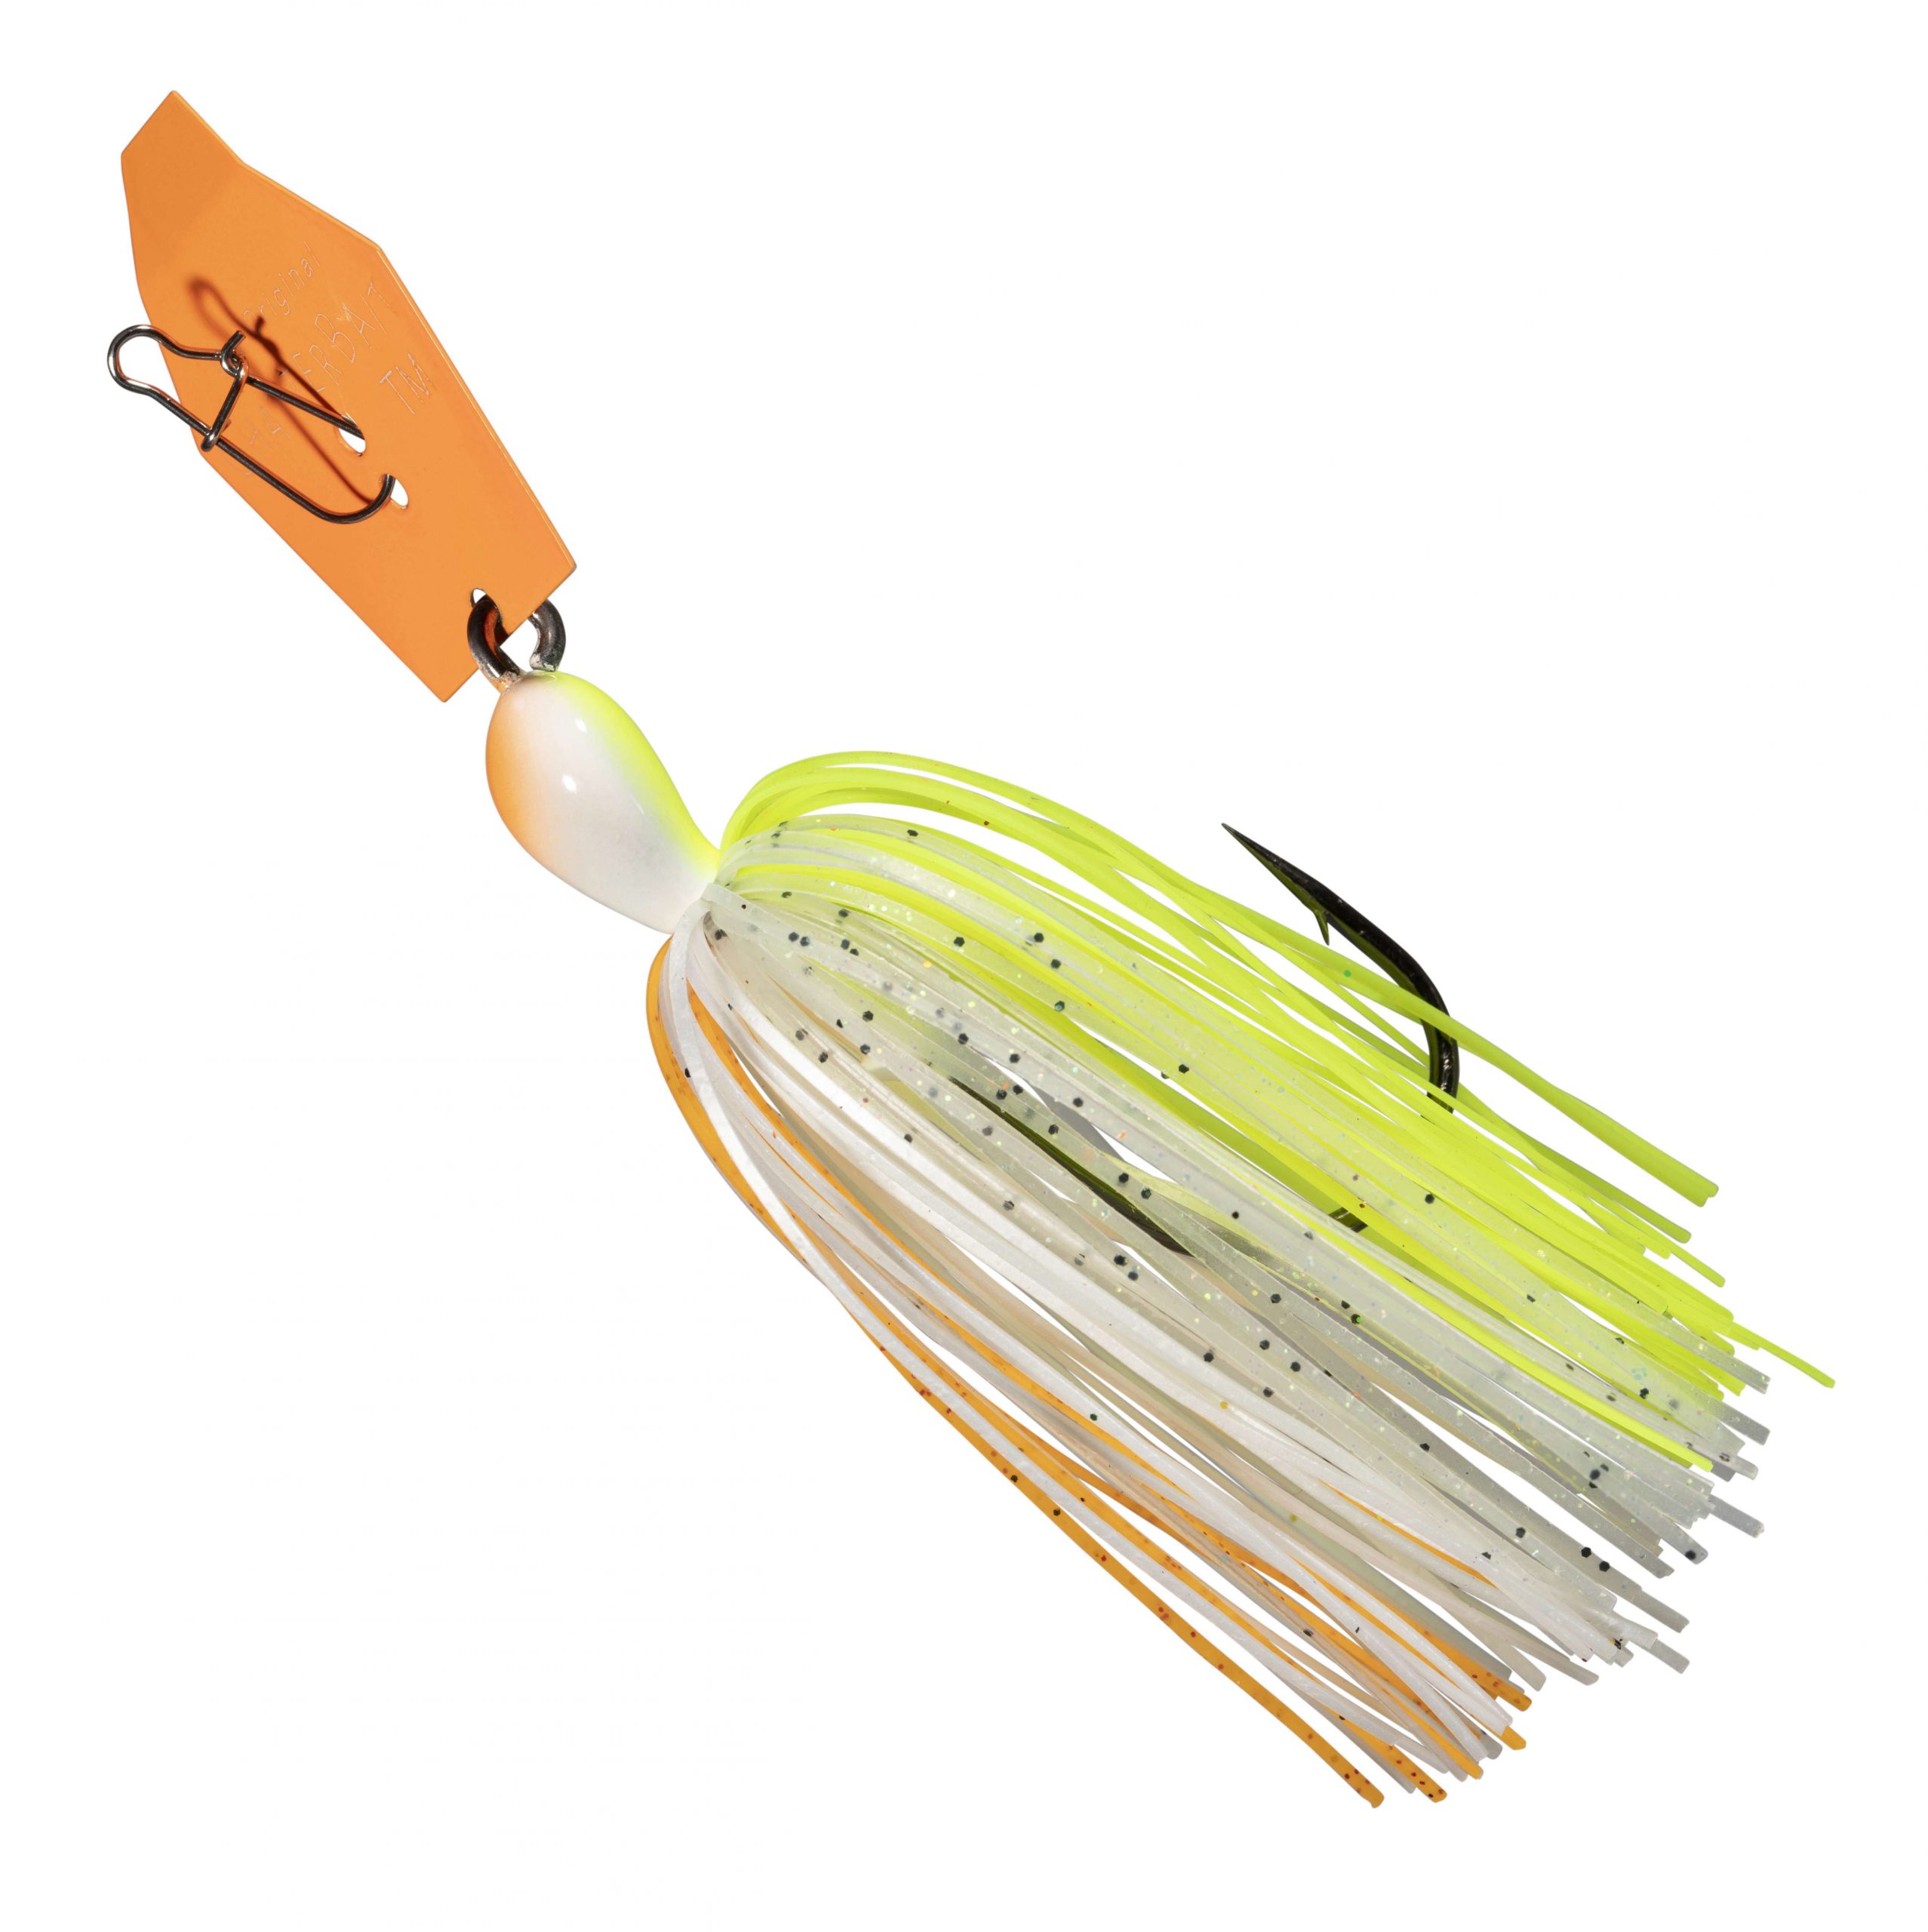 Driven by a diesel engine of a ChatterBladeÂ®âmore than twice the size and torque of a standard hex-bladeâthe Big Blade ChatterBait puts a bona fide wave-maker at the end of your line.